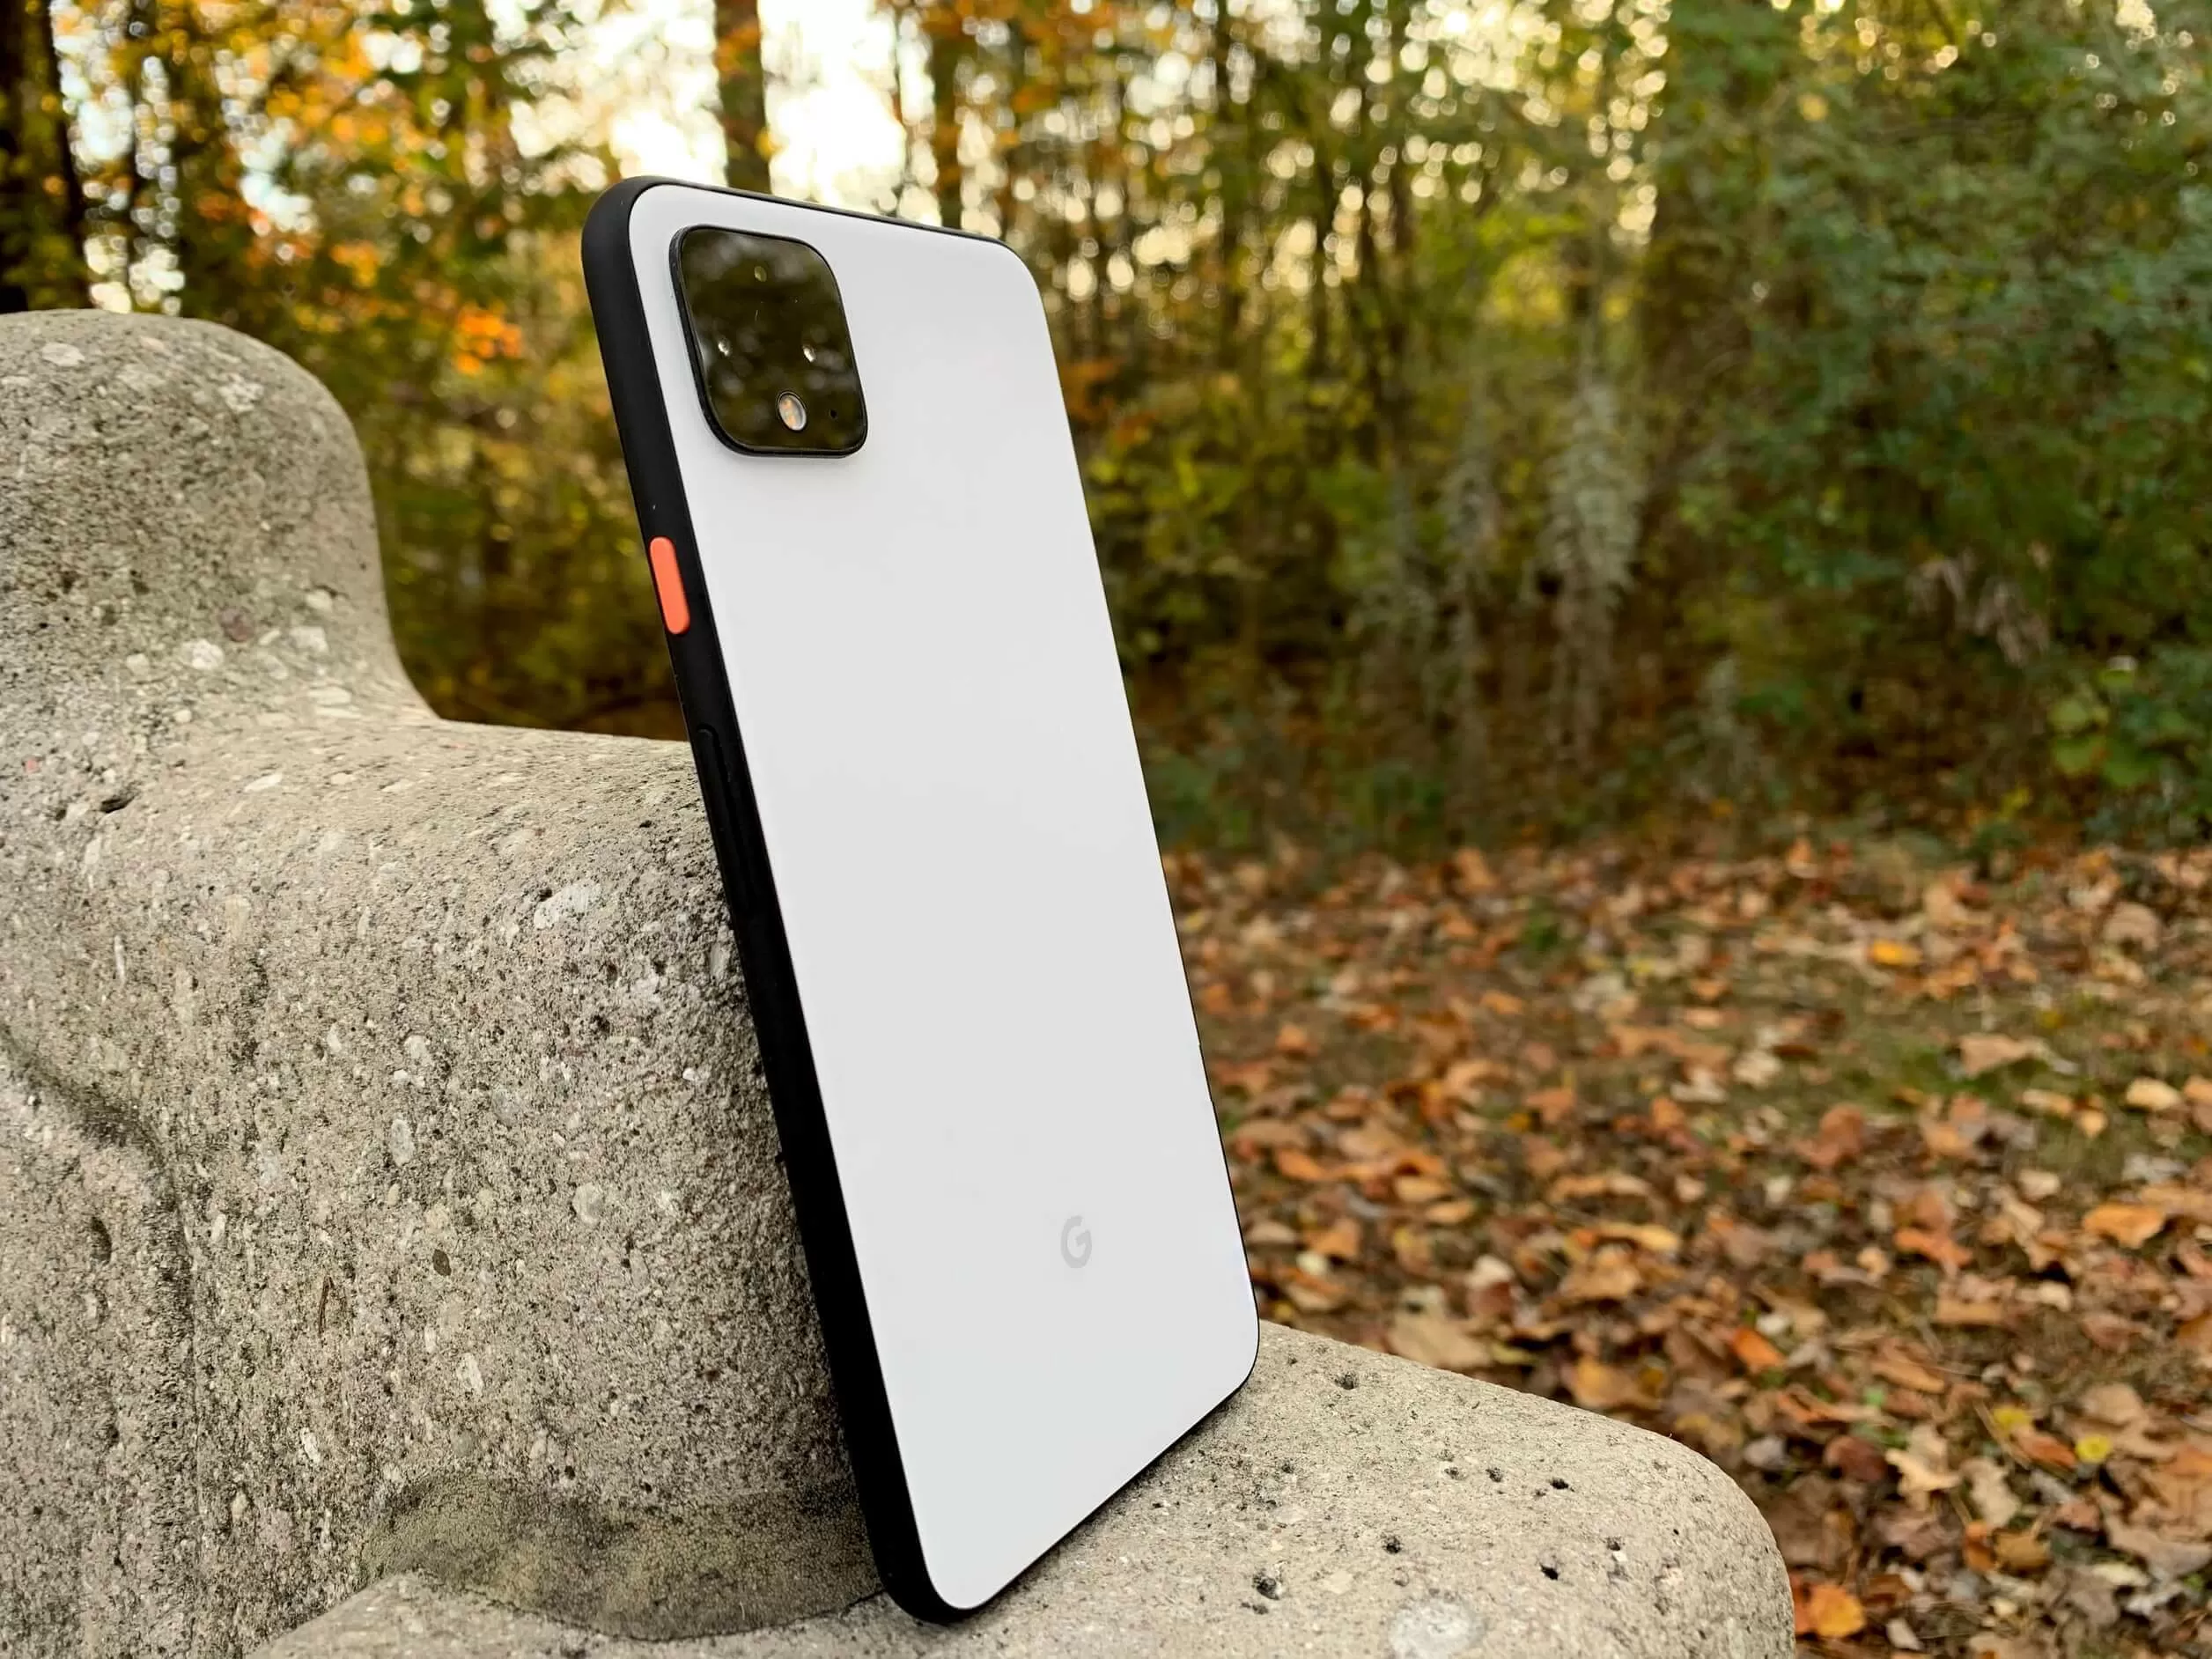 One month with the Google Pixel 4 XL